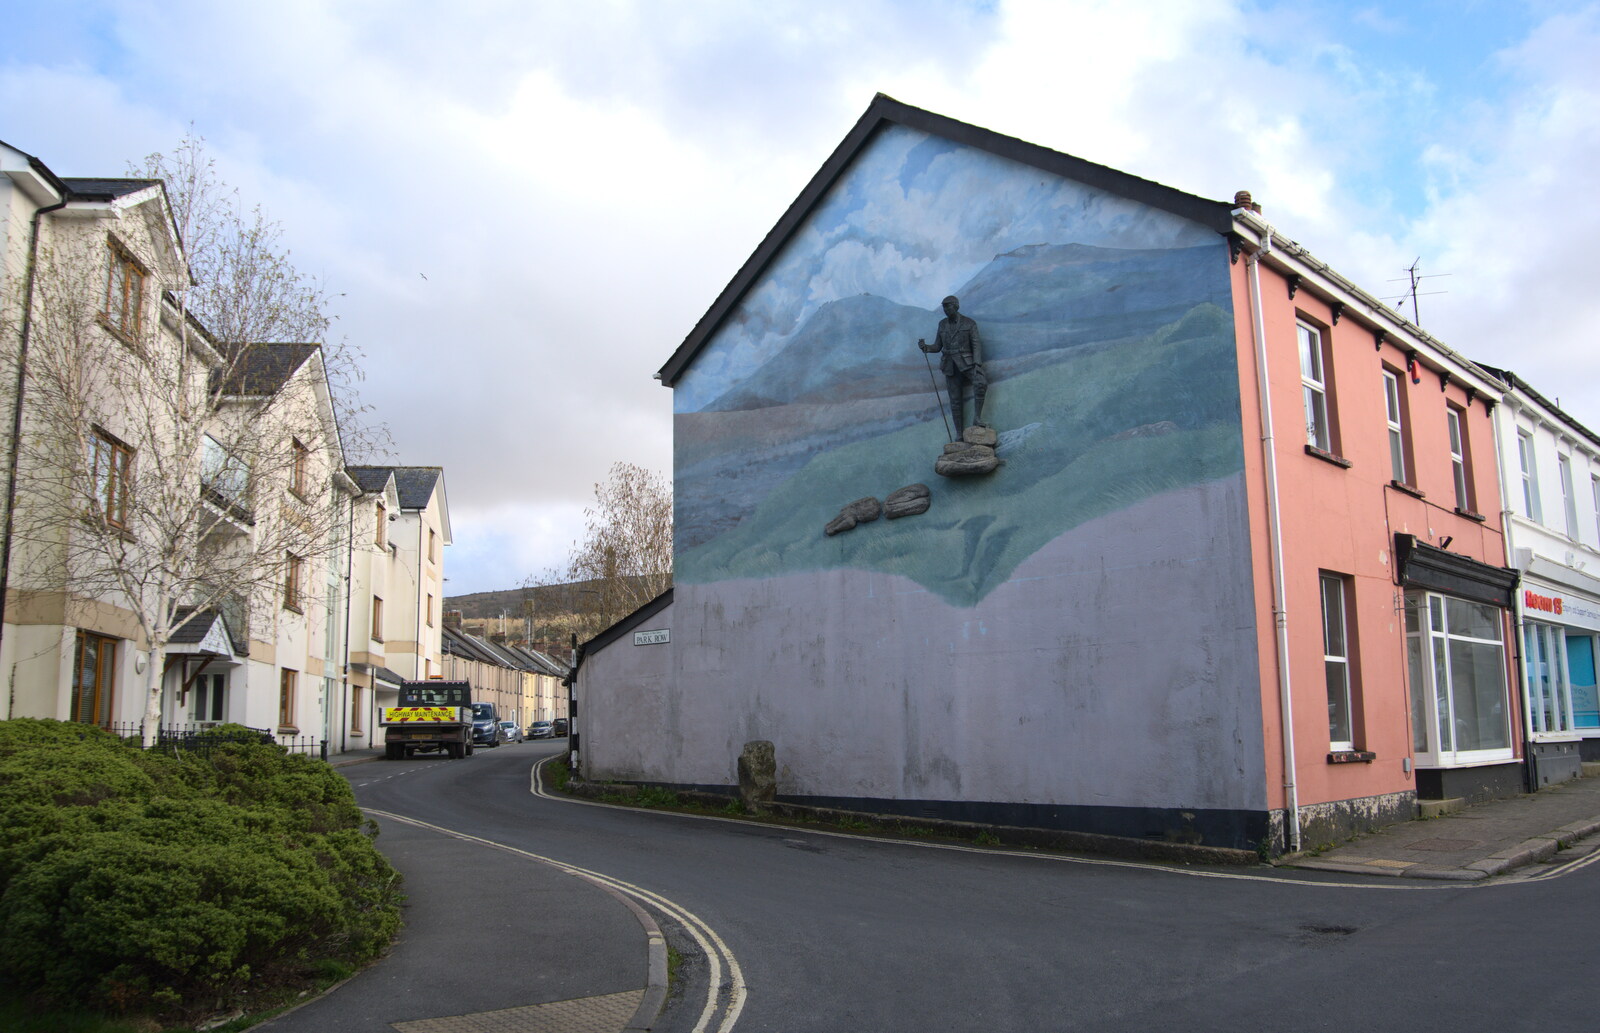 A sculpture on a house in Park Row from Chilli Farms, Okehampton and the Oxenham Arms, South Zeal, Devon - 10th April 2023